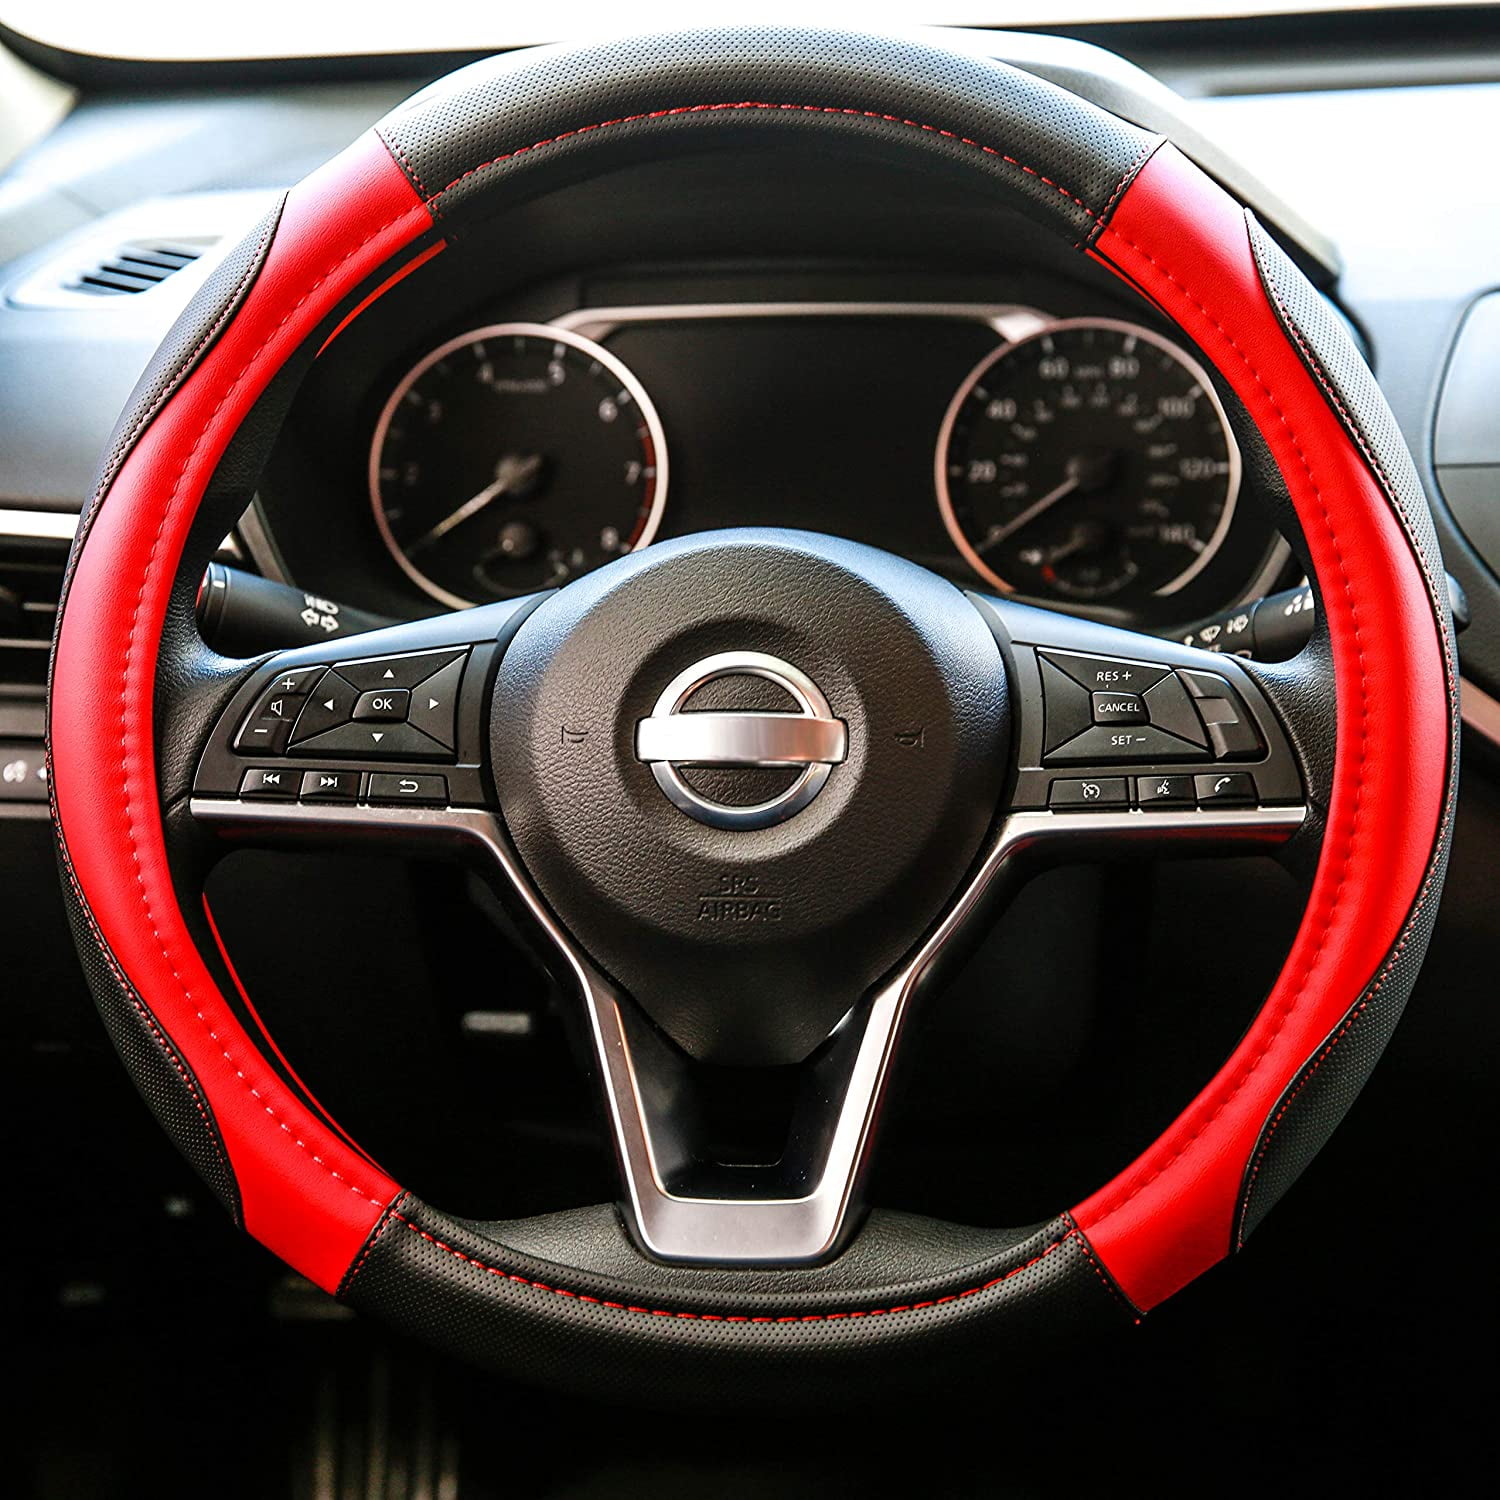 Shiny Red Metallic Finish Vinyl Floor Mats and Faux Leather Steering Wheel Cover 